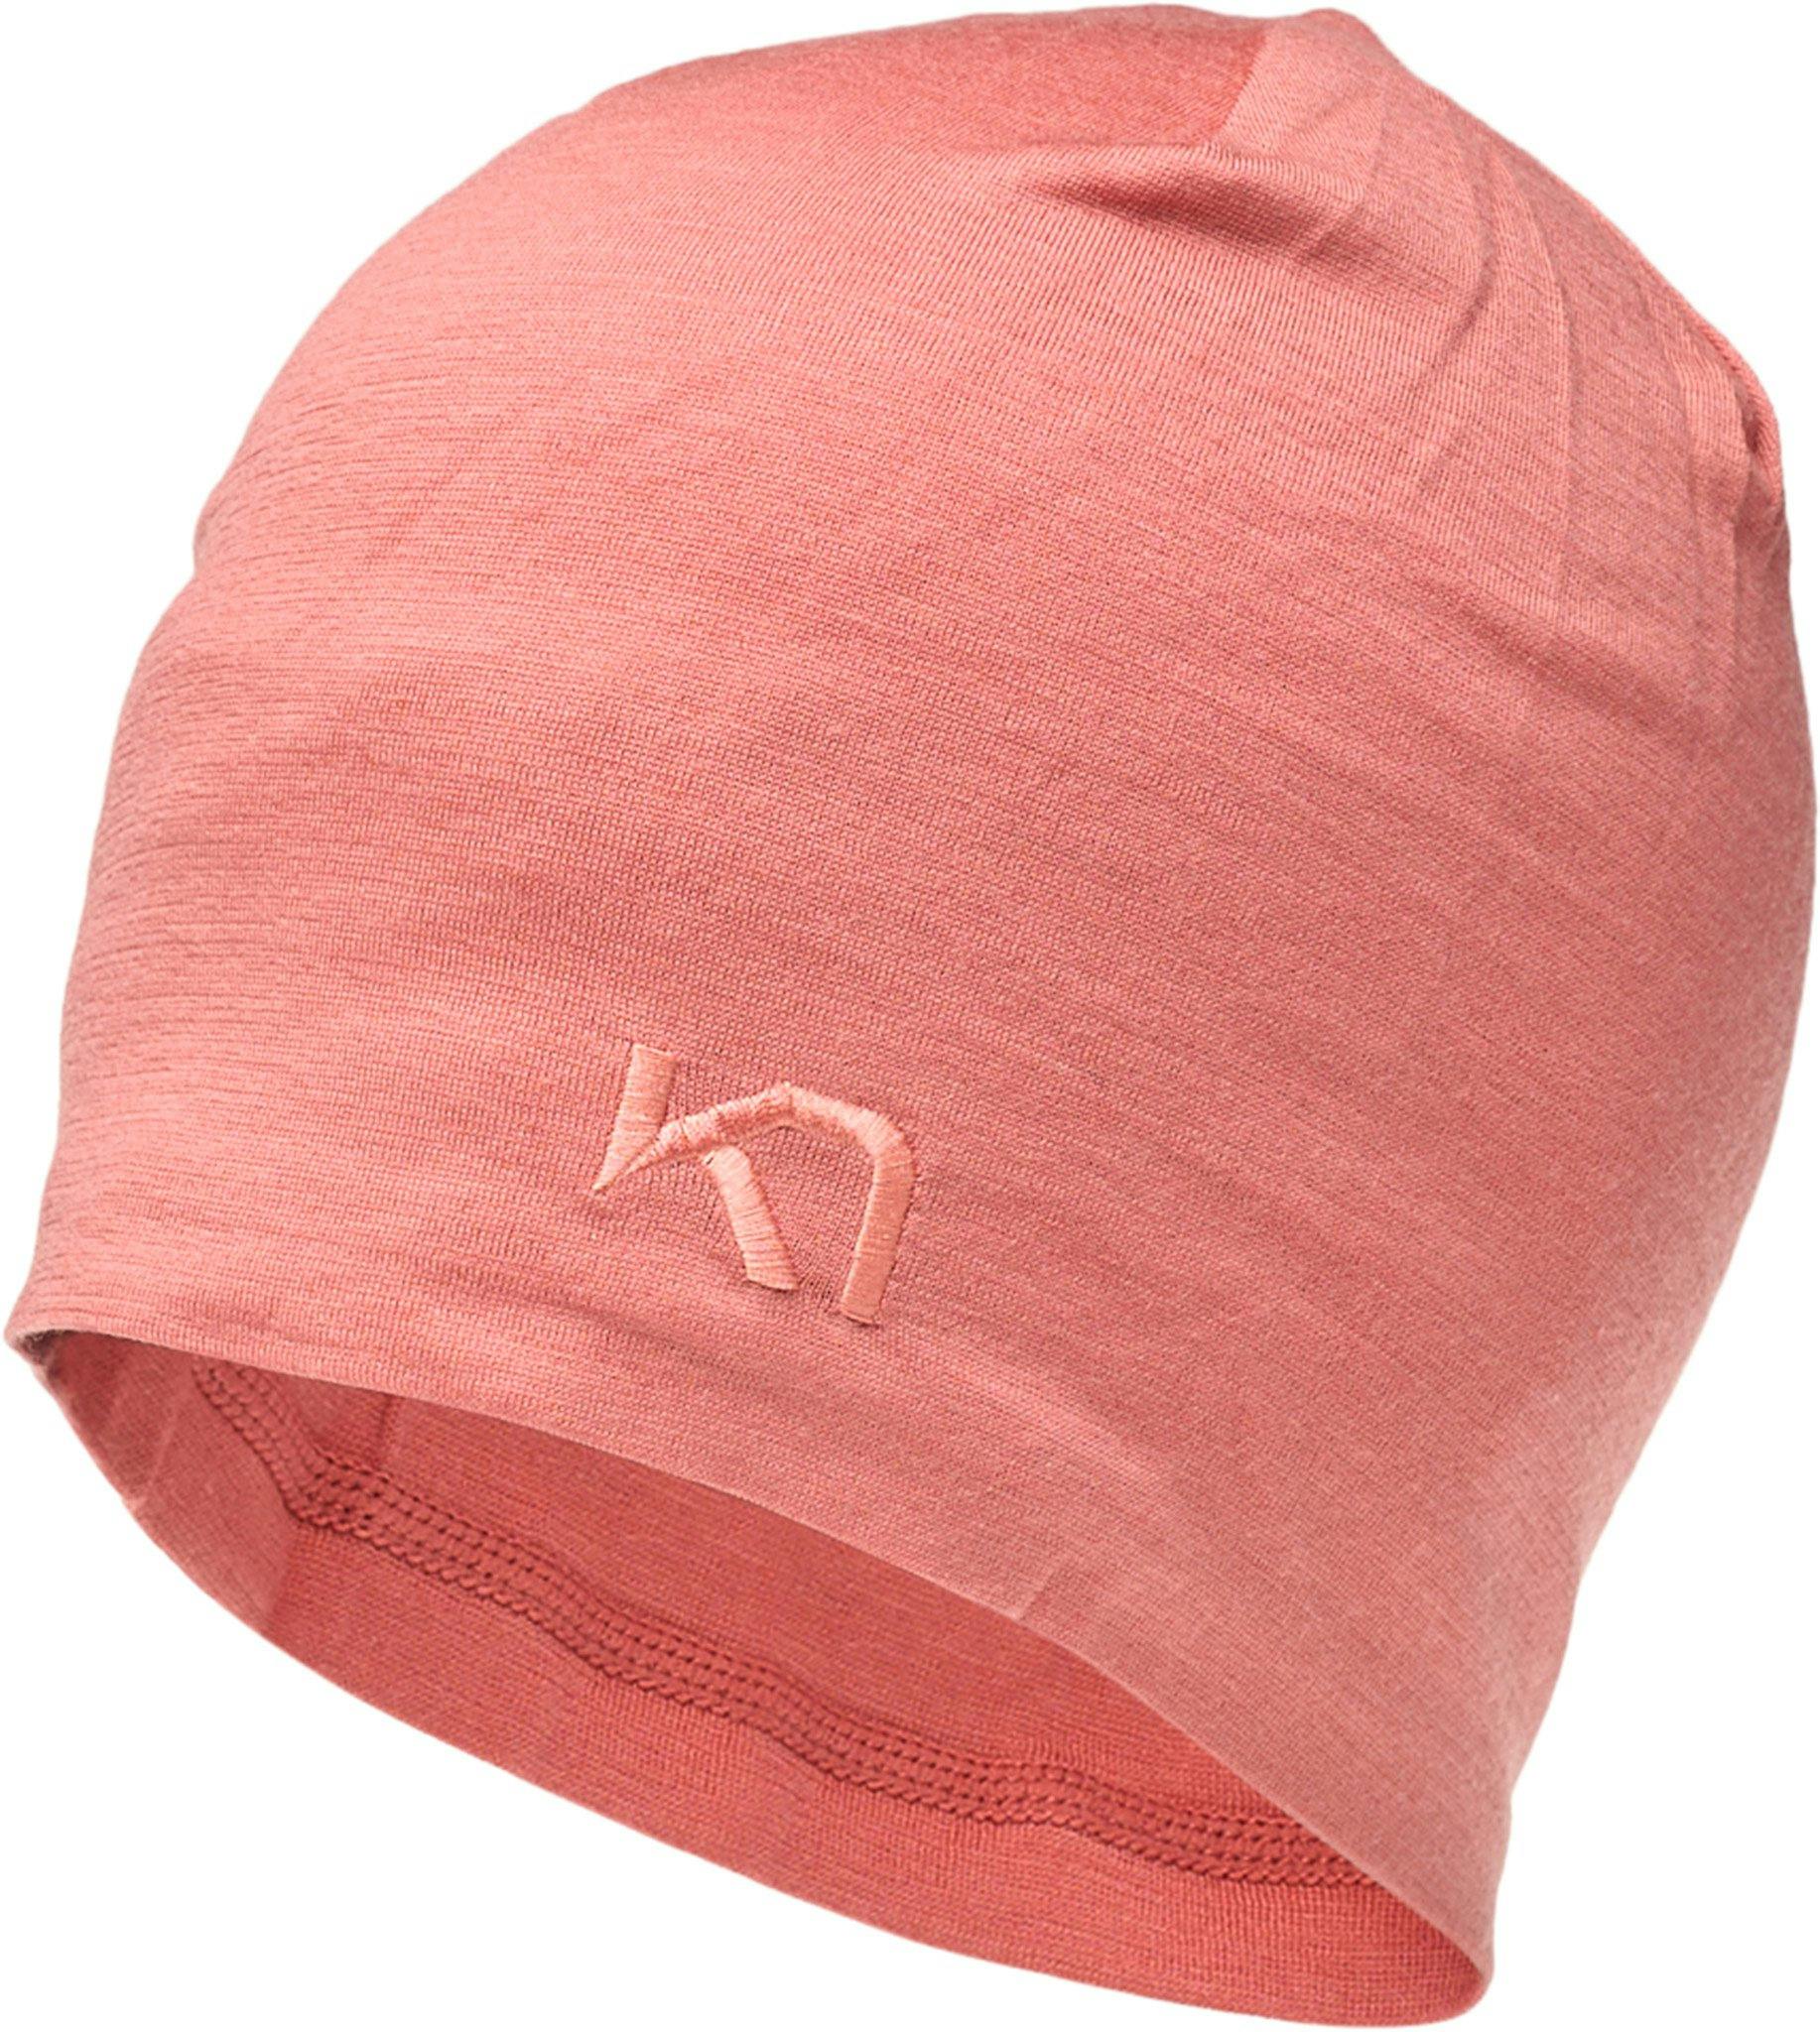 Product image for Tikse Beanie - Women's